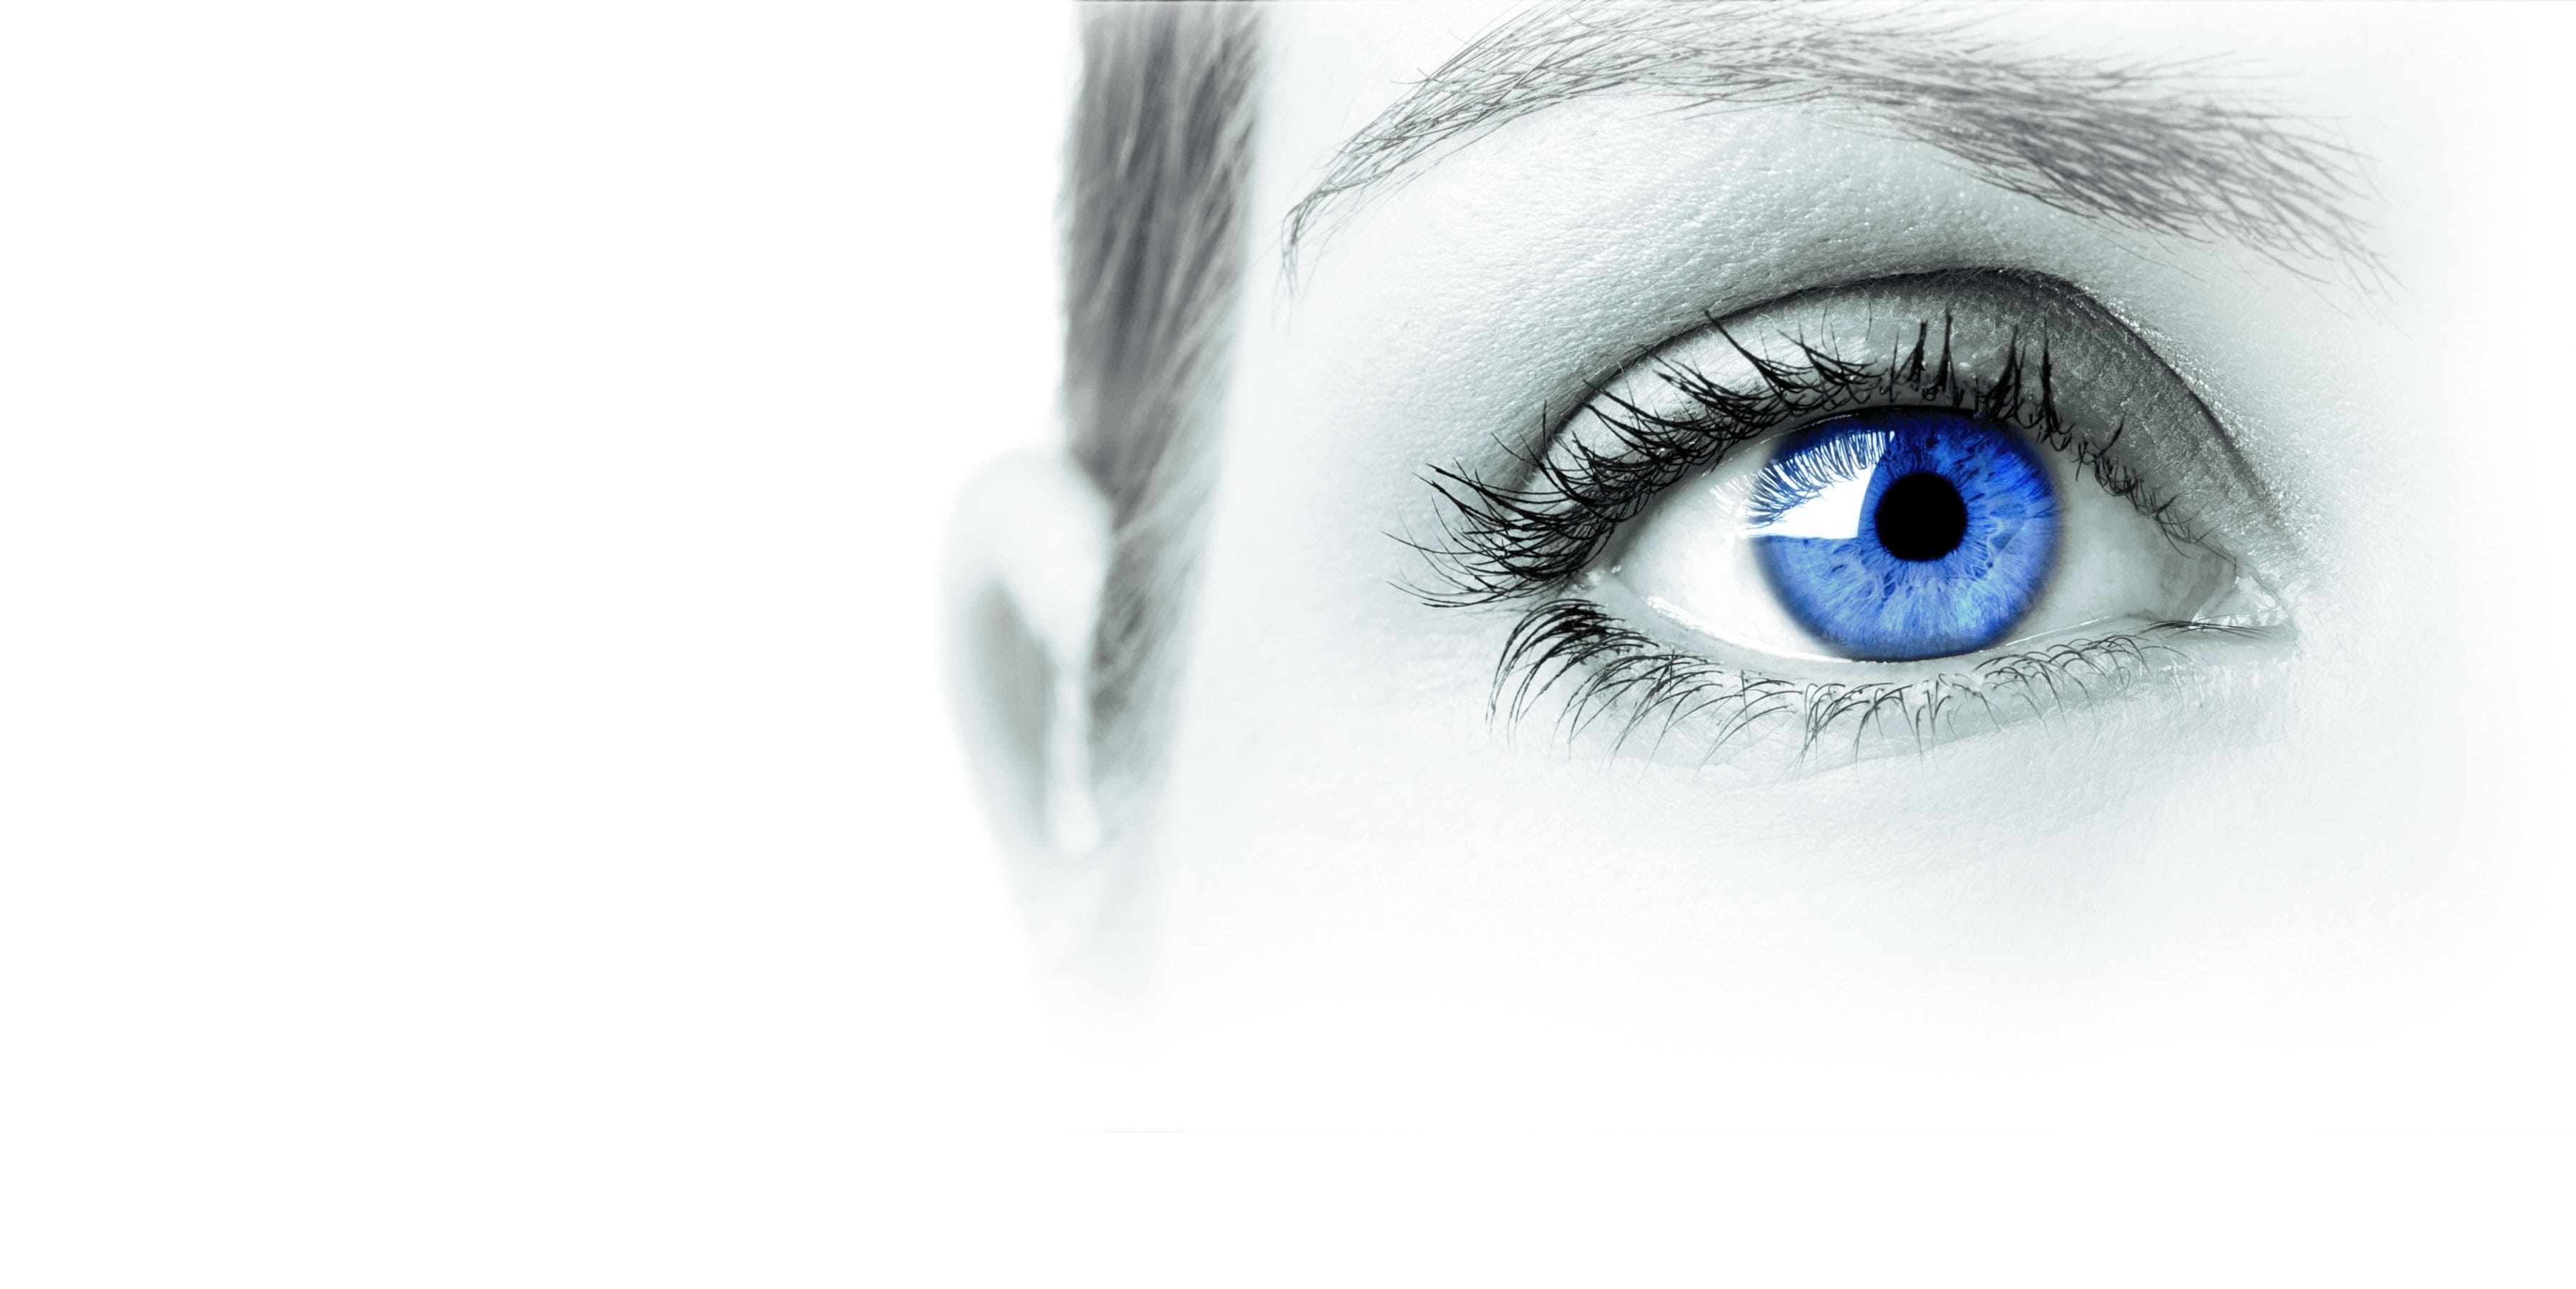 Header graphic for diagnostic eye products category. A woman’s blue eye.